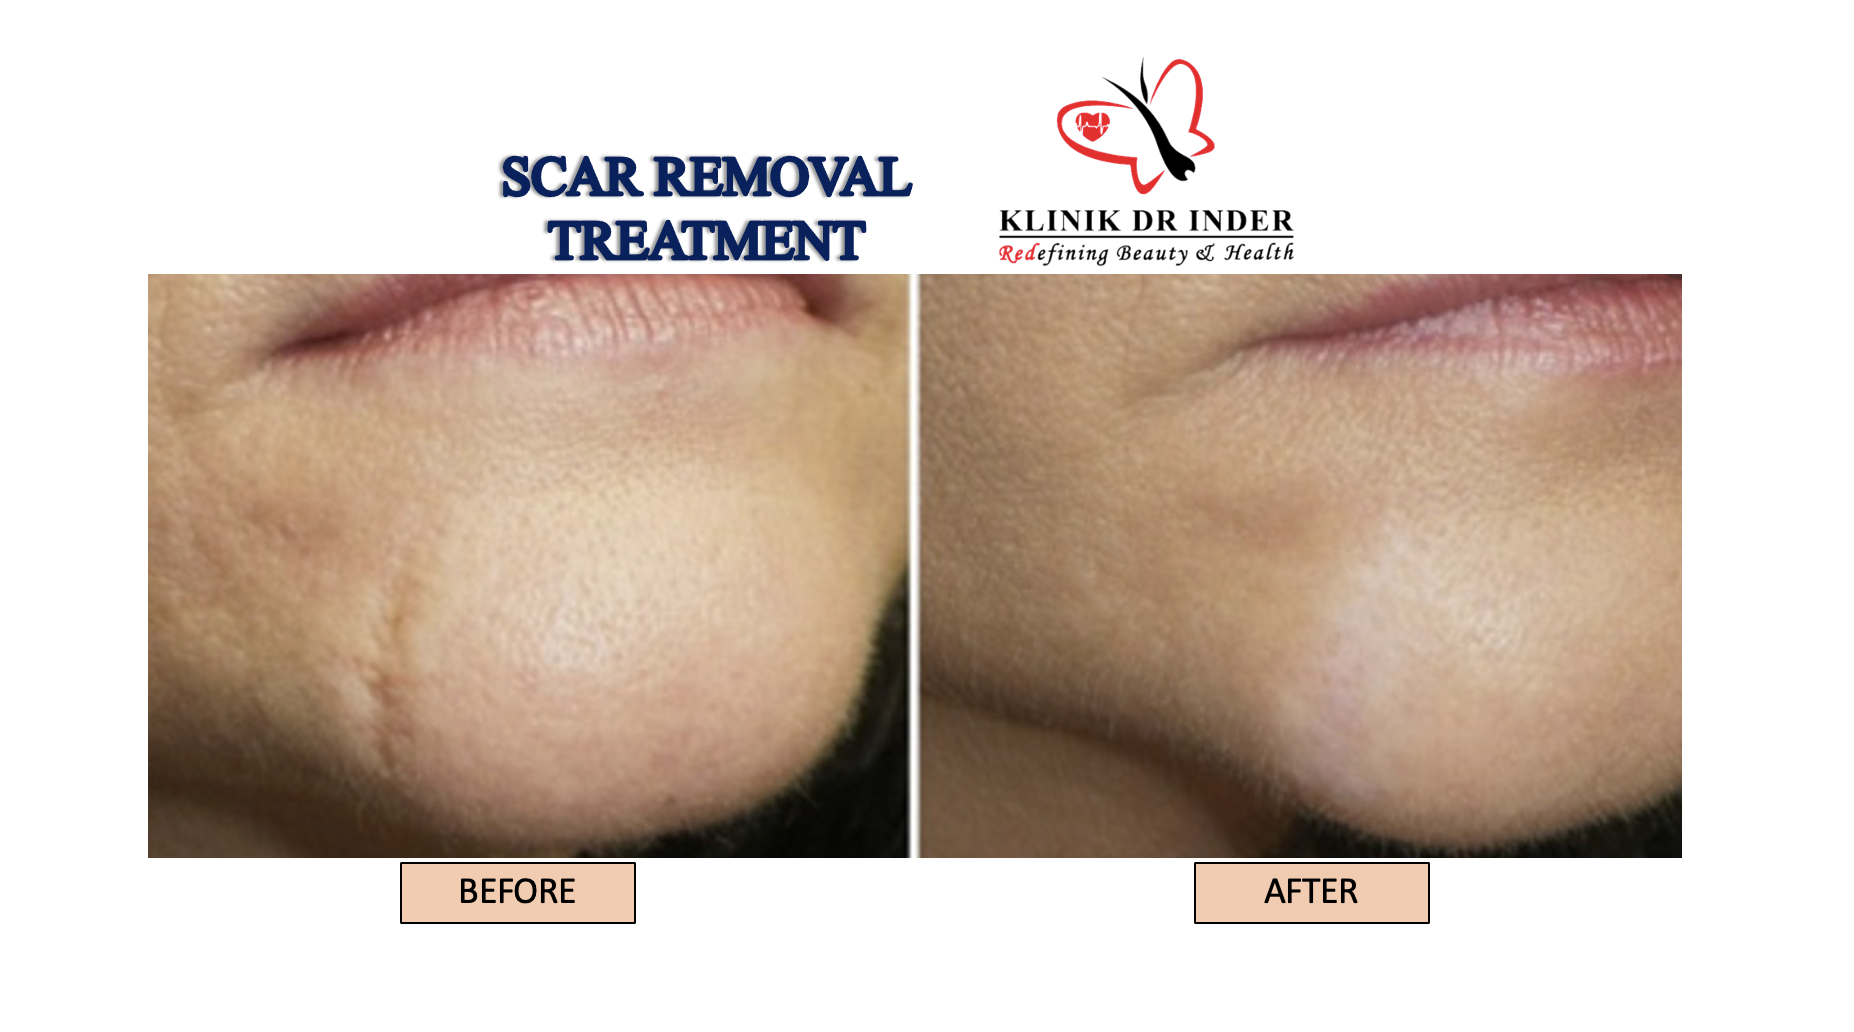 SCAR REMOVAL BEFORE AFTER 3 